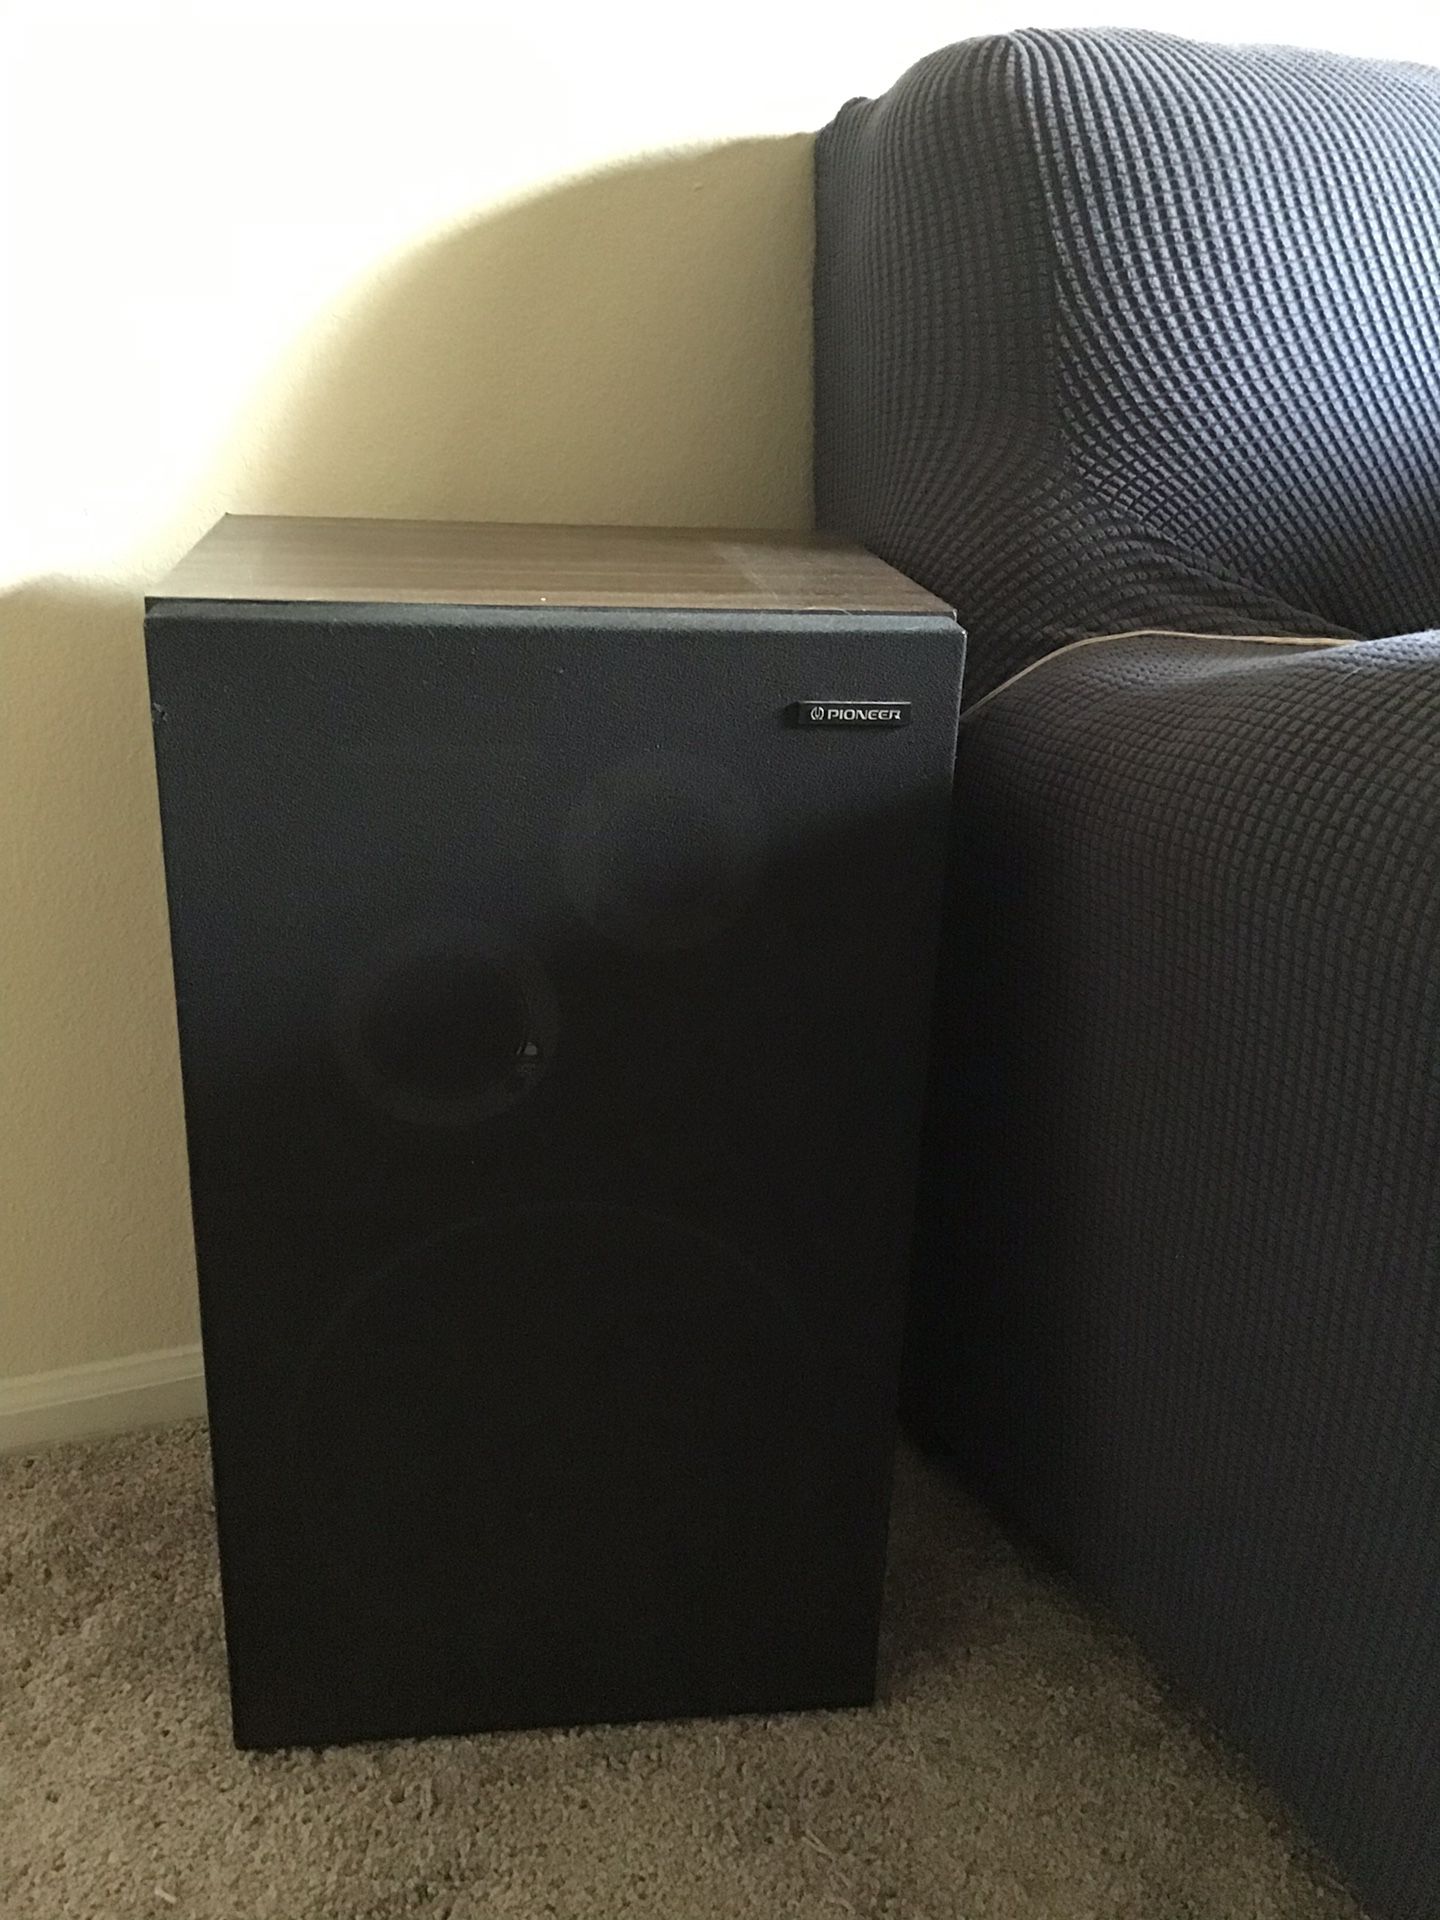 Two Pairs of speakers (Large Pioneer and Smaller Bose)